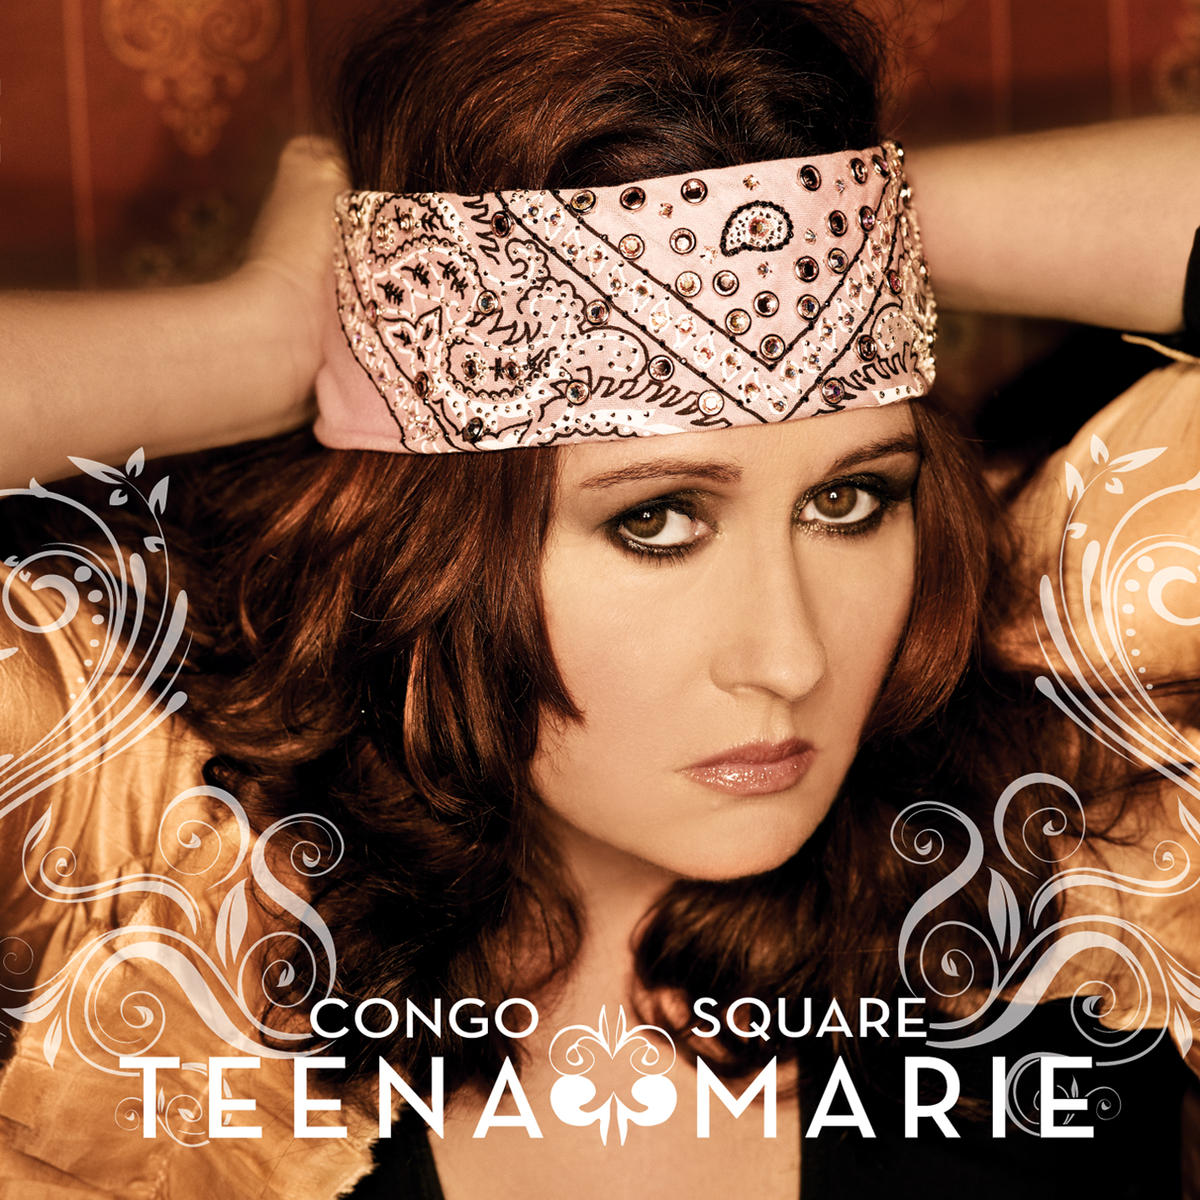 Anyone Remember The 80s Big Hit Lovergirl By Teena Marie Singer Dance Ballad Music